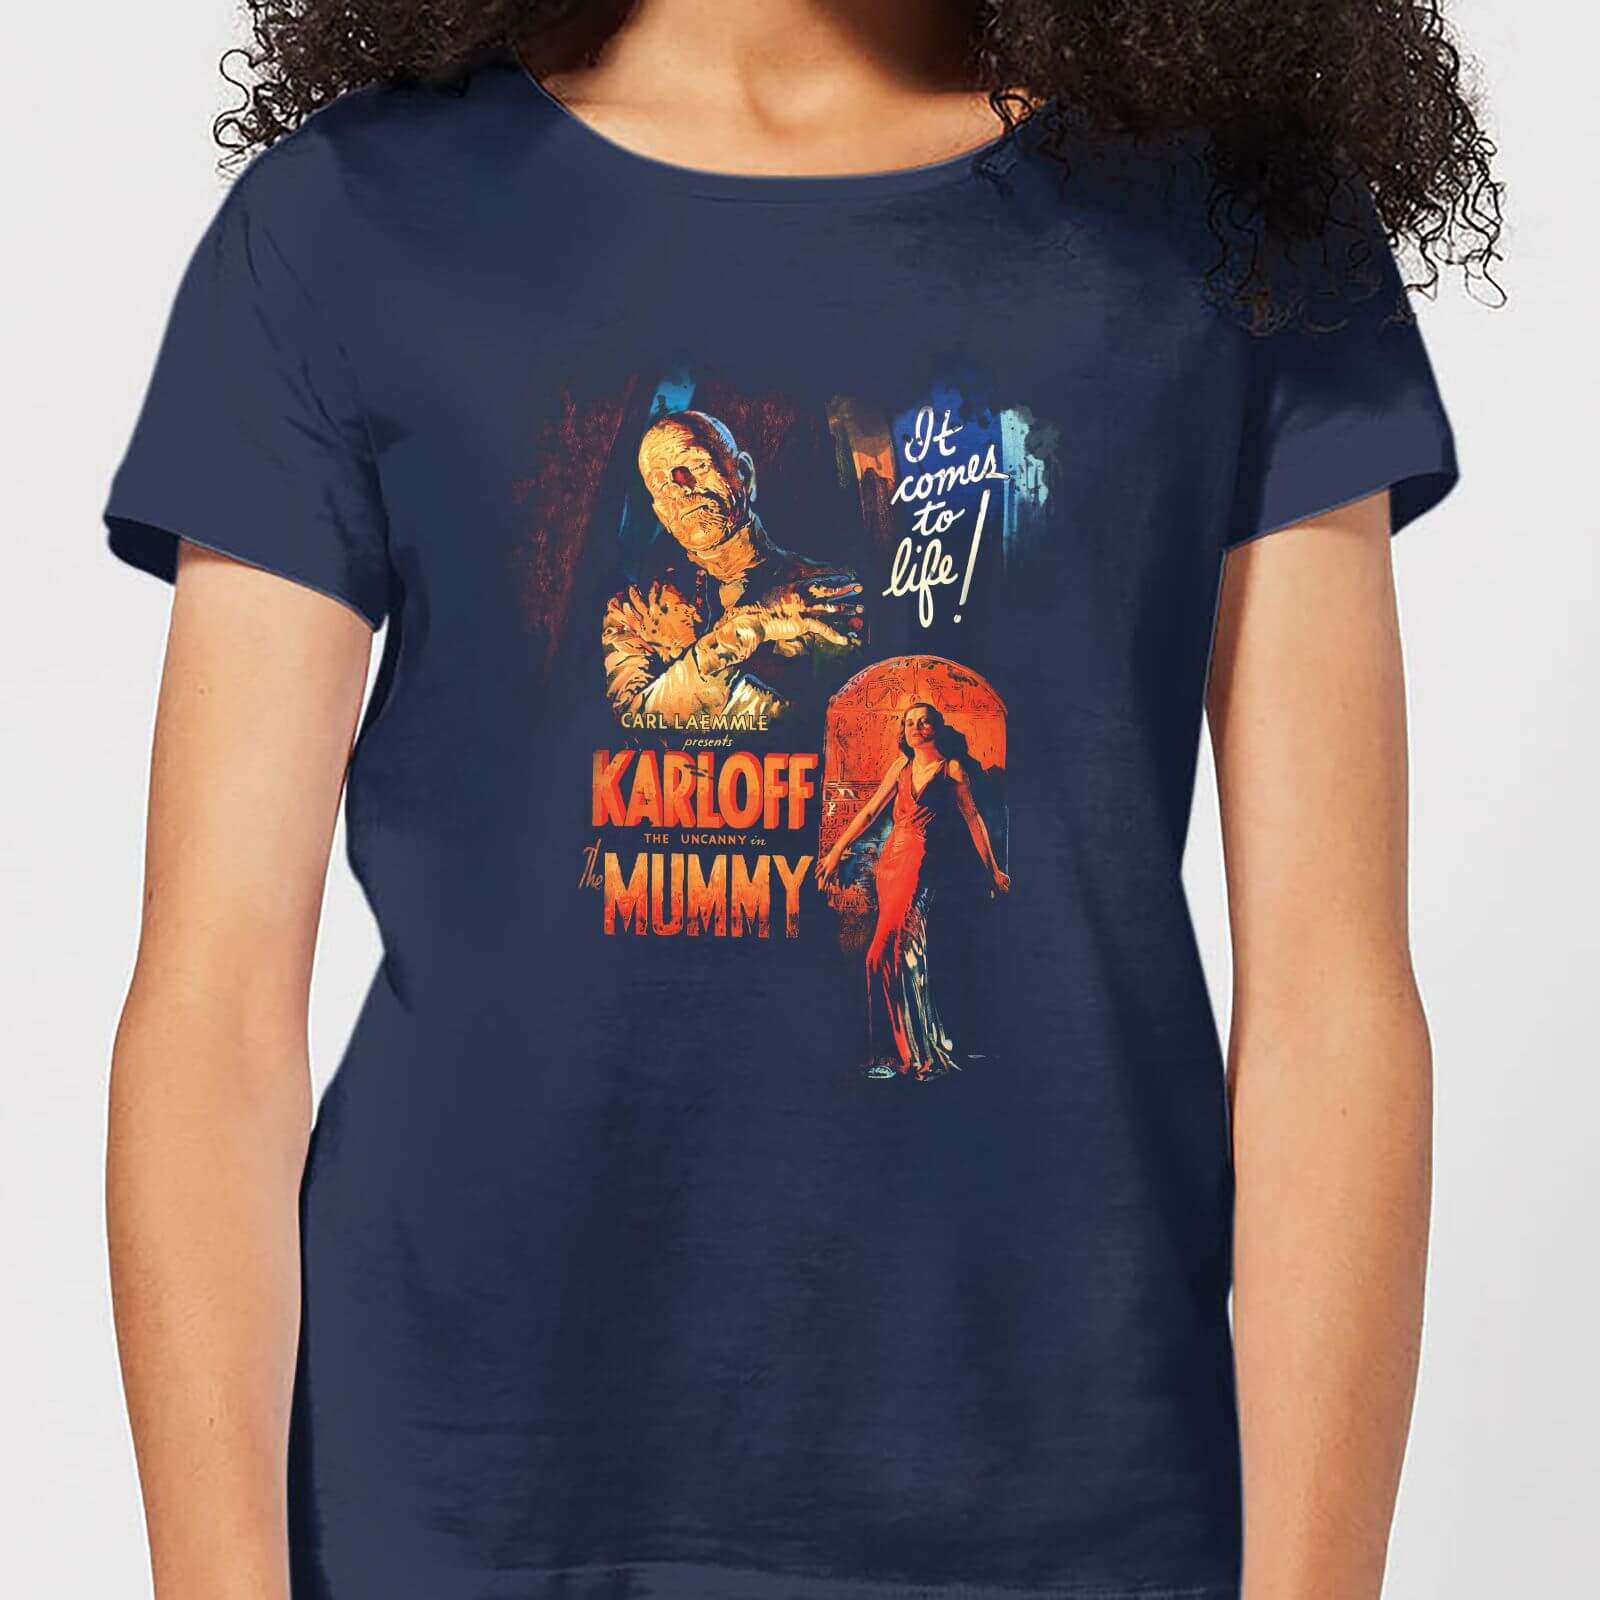 Universal Monsters The Mummy Vintage Poster Women's T-Shirt - Navy - L - Navy